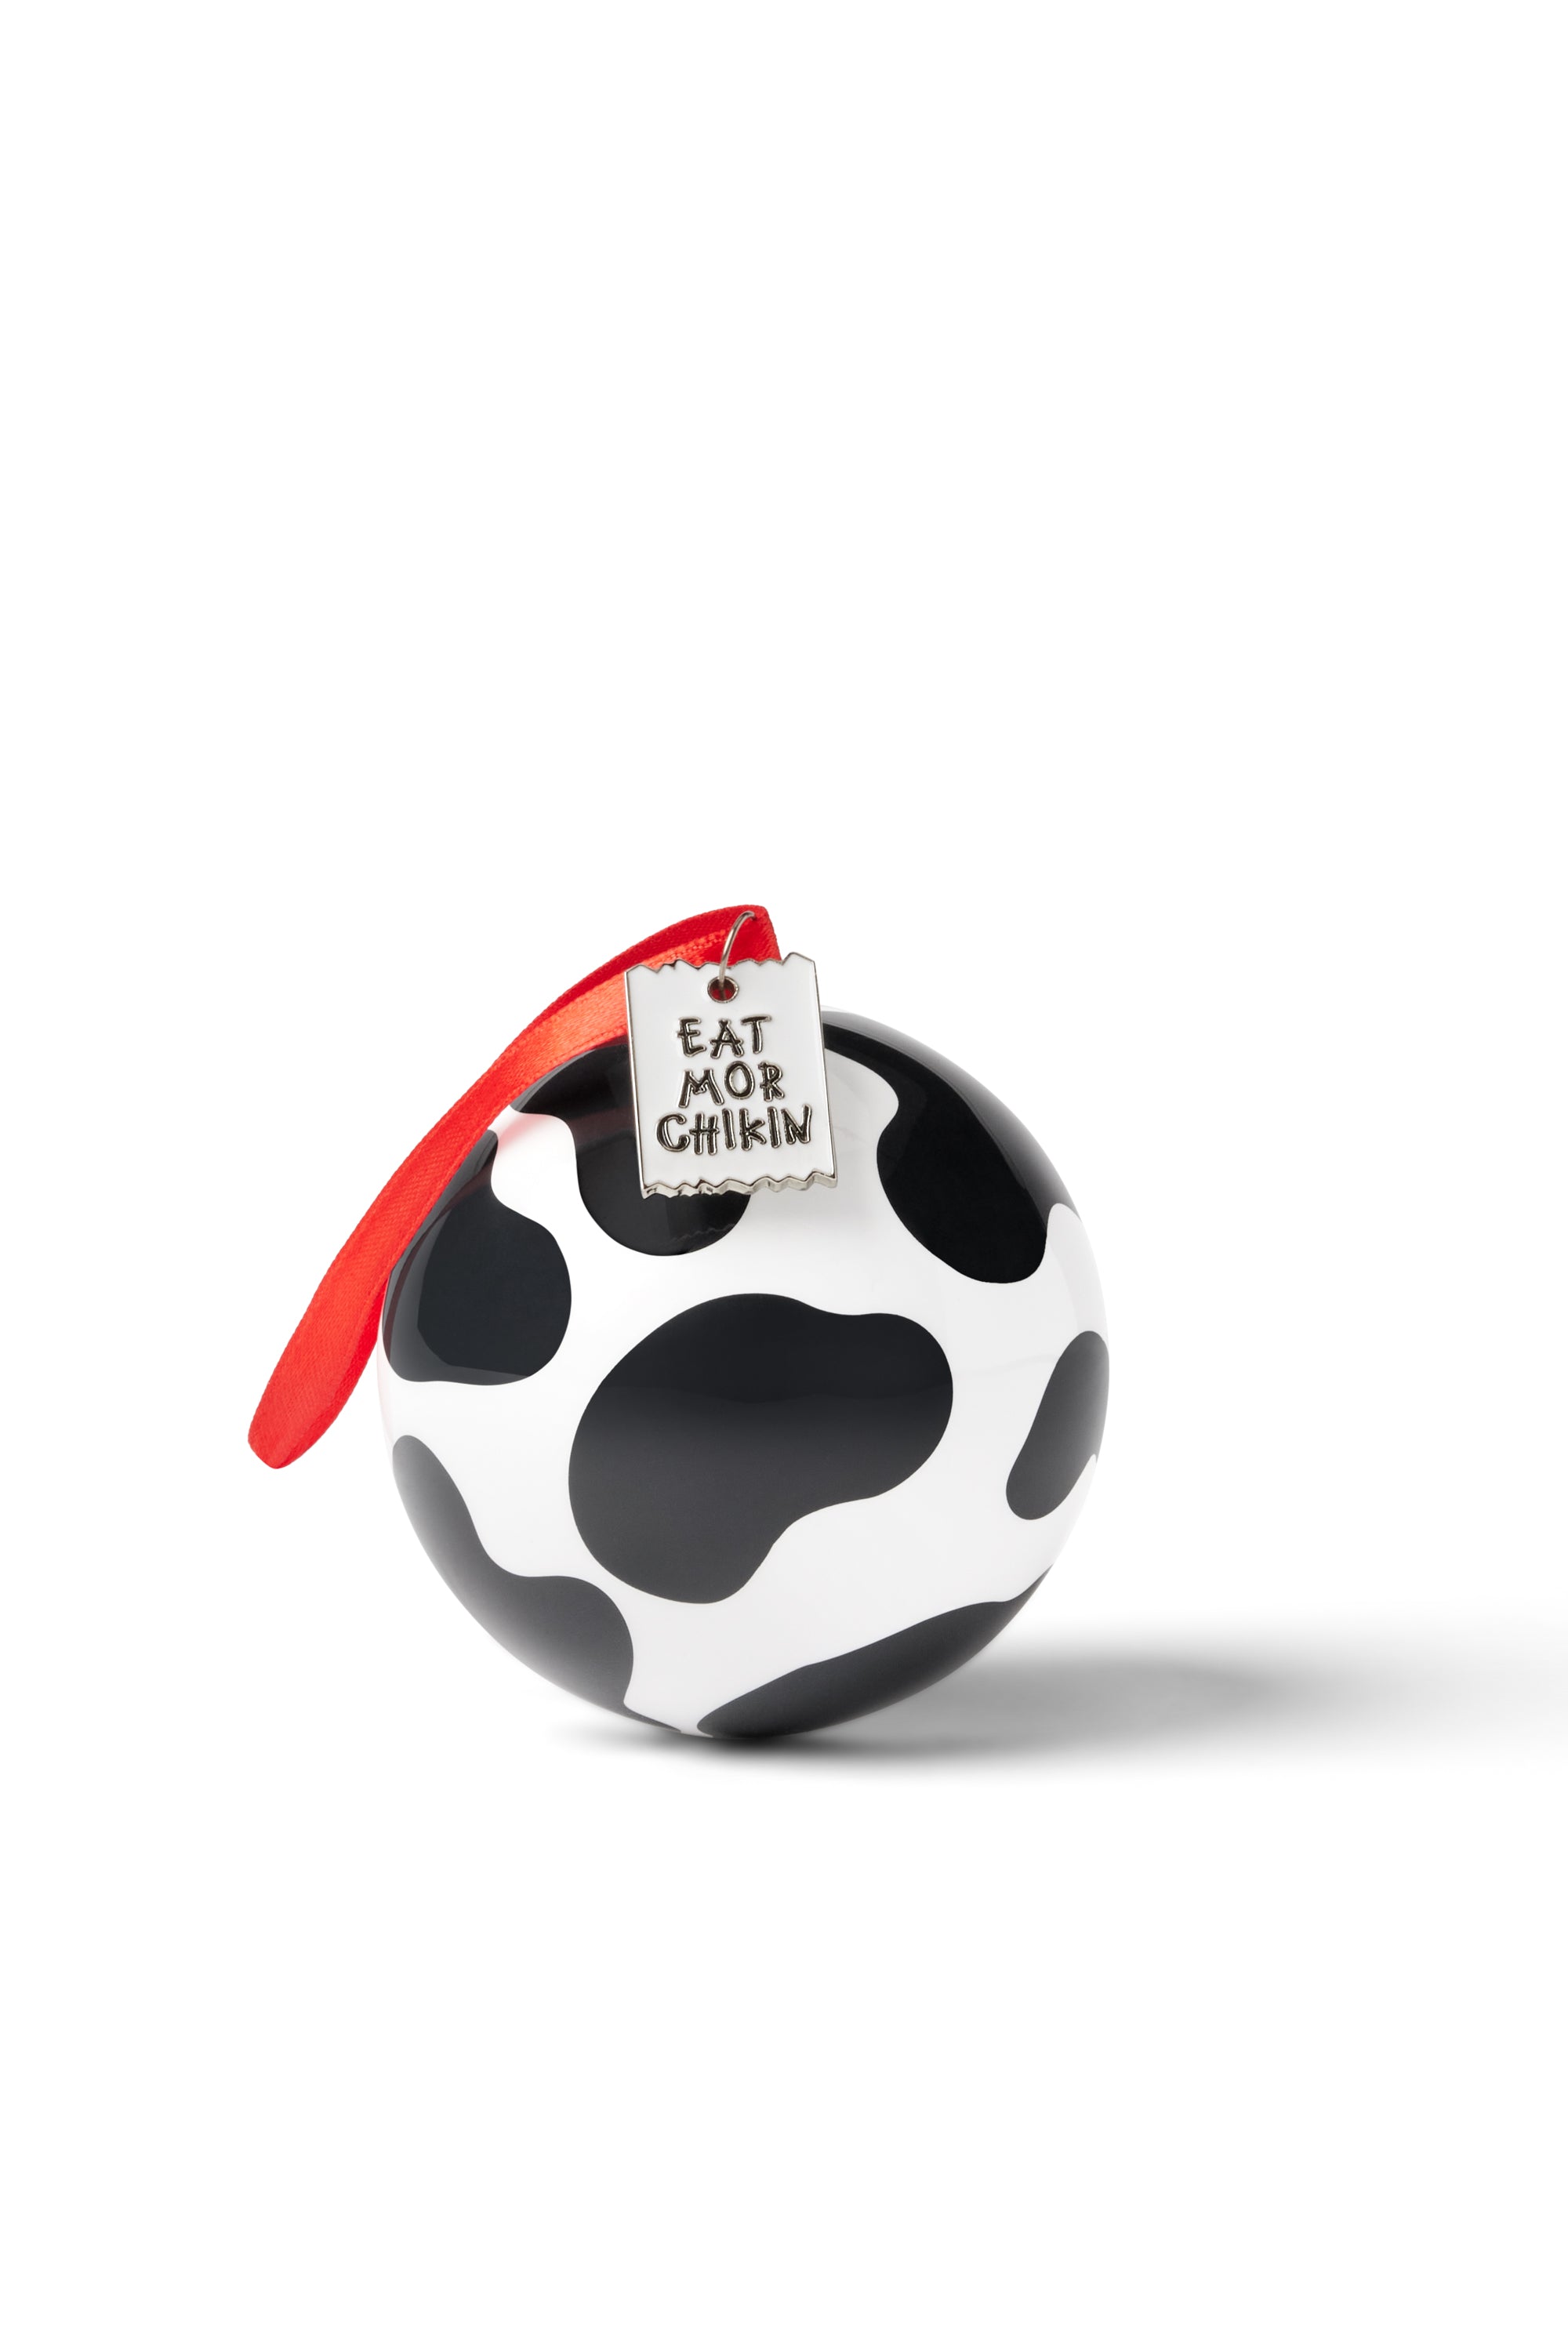 Black and white cow print ball ornament with red ribbon hanging down side and tag on top that says "Eat Mor Chikin"